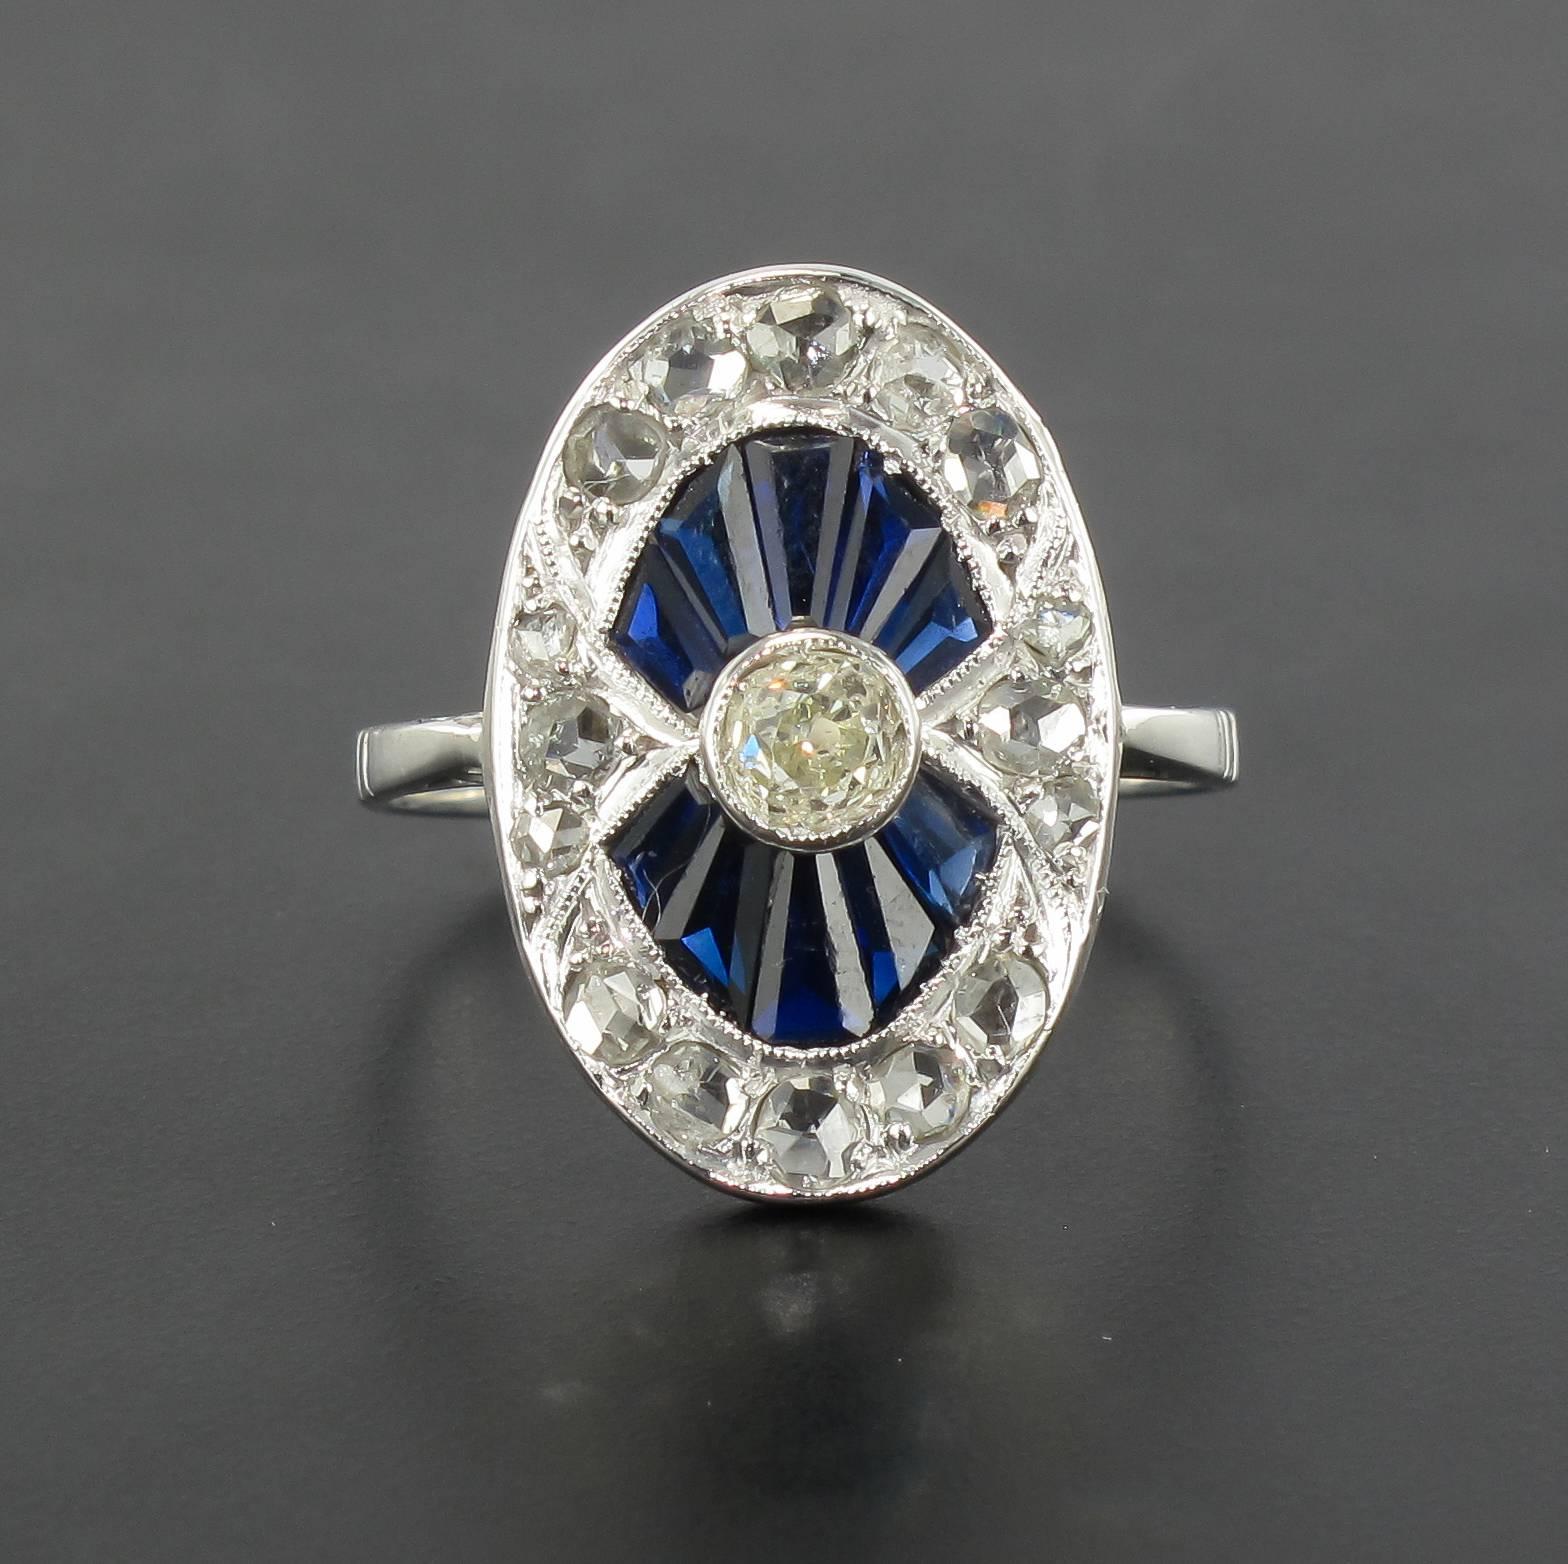 Ring in 18 carat white gold, eagle head hallmark.

This radiant antique oval shaped ring is bezel set with a central antique brilliant cut diamond surrounded by calibrated sapphires and an outer circle of good sized rose cut diamonds. 
The ring